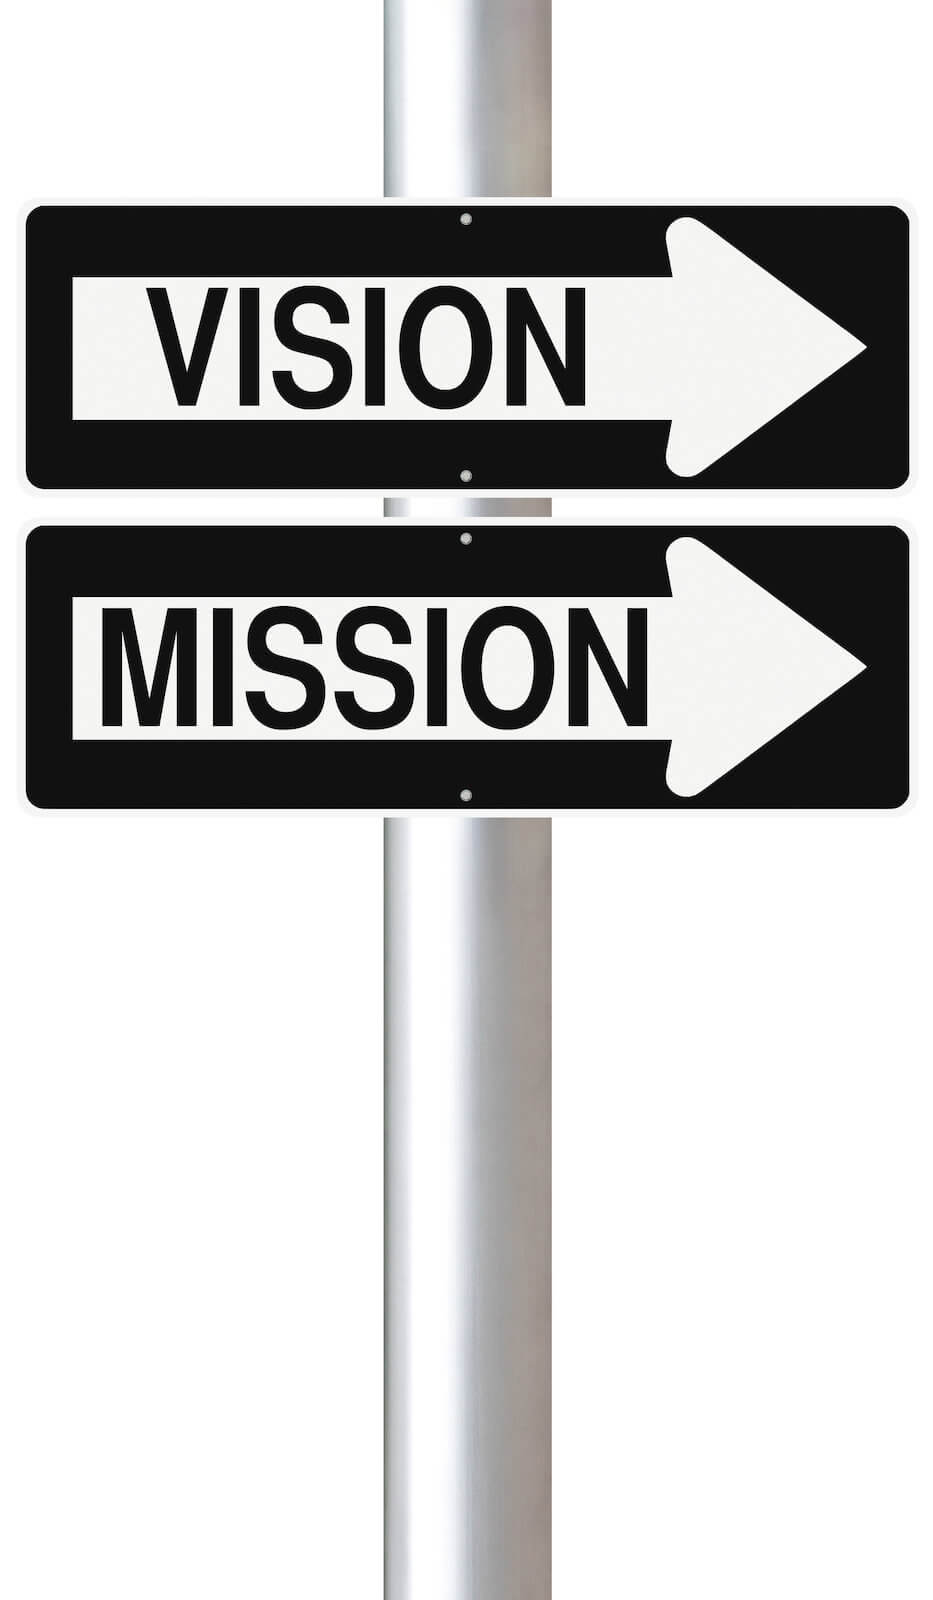 Our_vision-and-mission